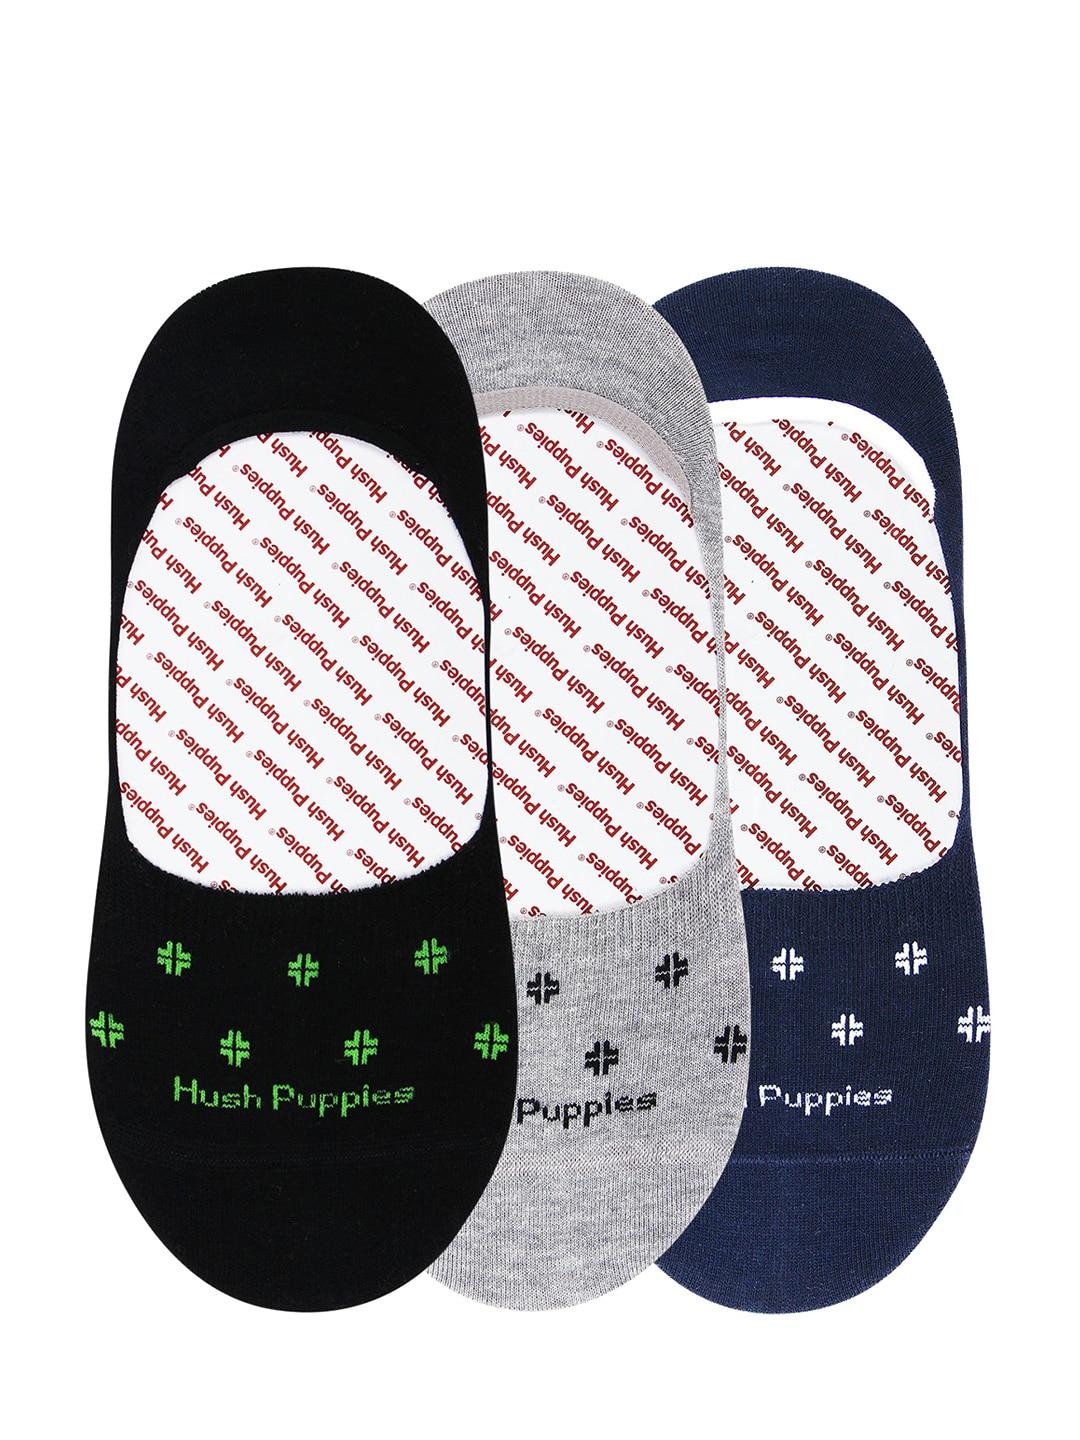 hush-puppies-men-pack-of-3-assorted-patterned-shoe-liners